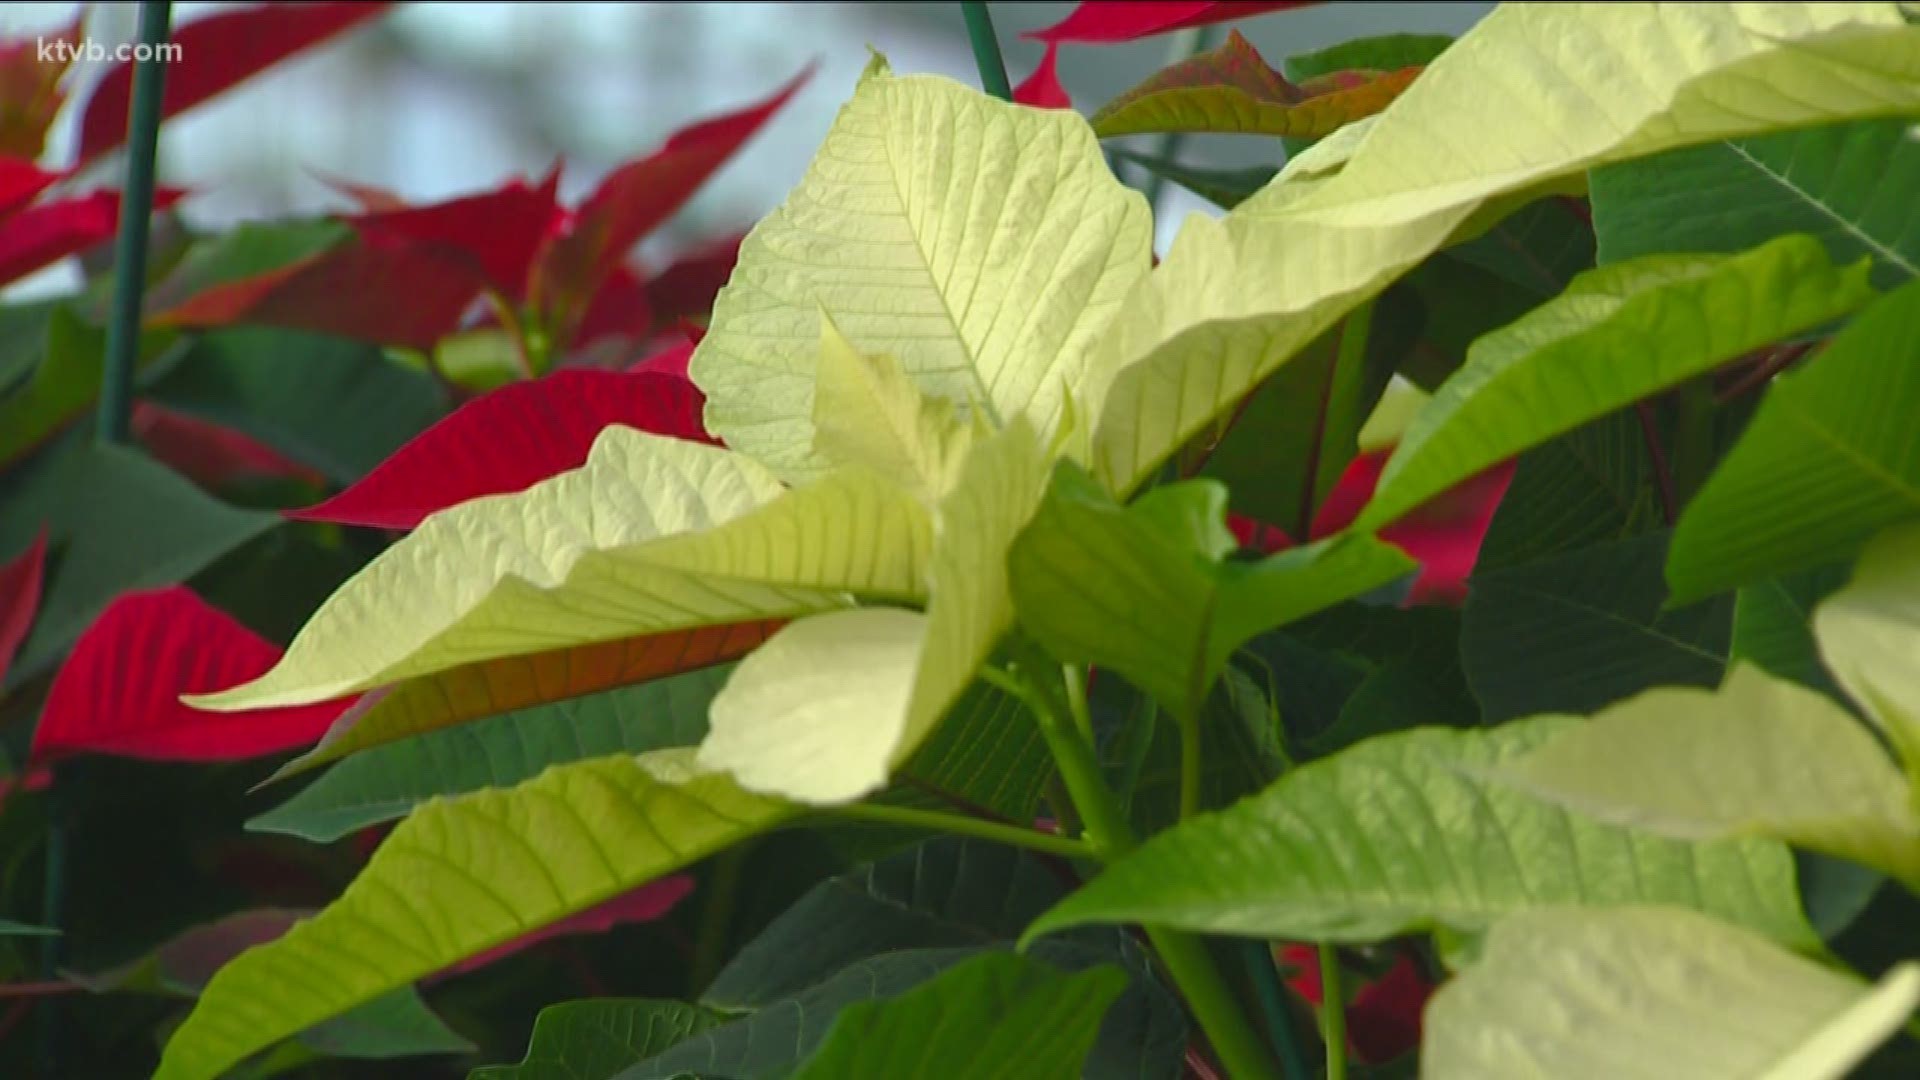 Jim Duthie tells us how these iconic plants magically transform into all of their brilliant colors, just in time for the holidays.